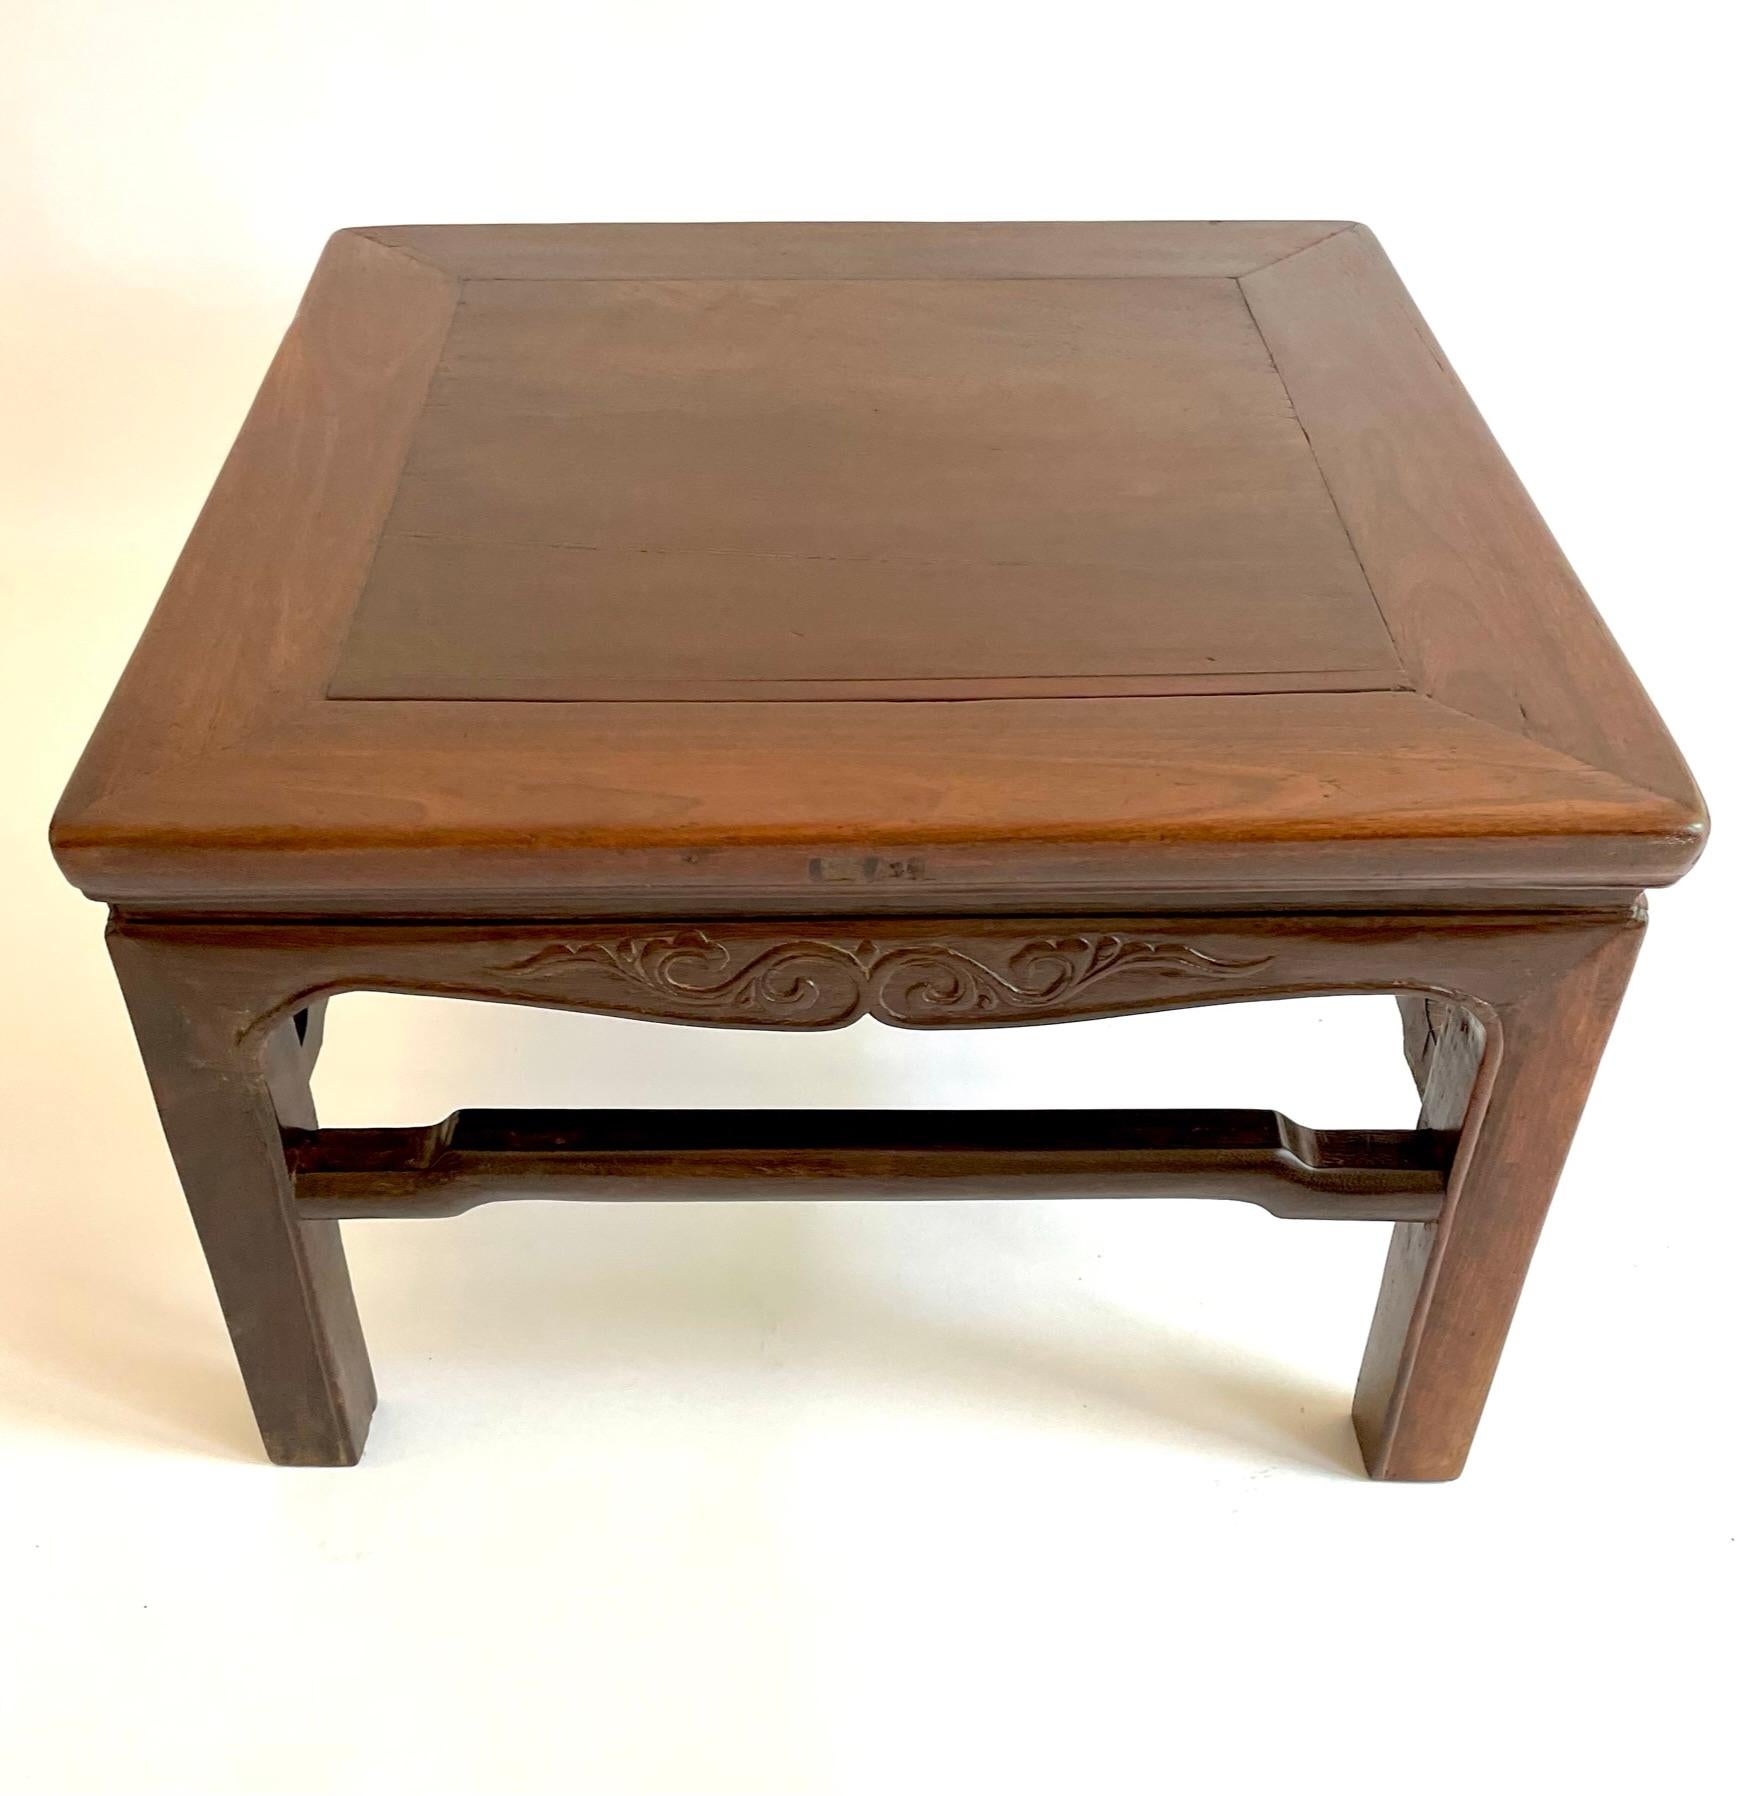 This 19th century kang table is rare because of the wood it’s carved from, Ironwood. Teilimu, Chinese Ironwood is a slow growing dense hardwood that is a very desirable wood for Chinese antique collectors. This table is crafted with traditional